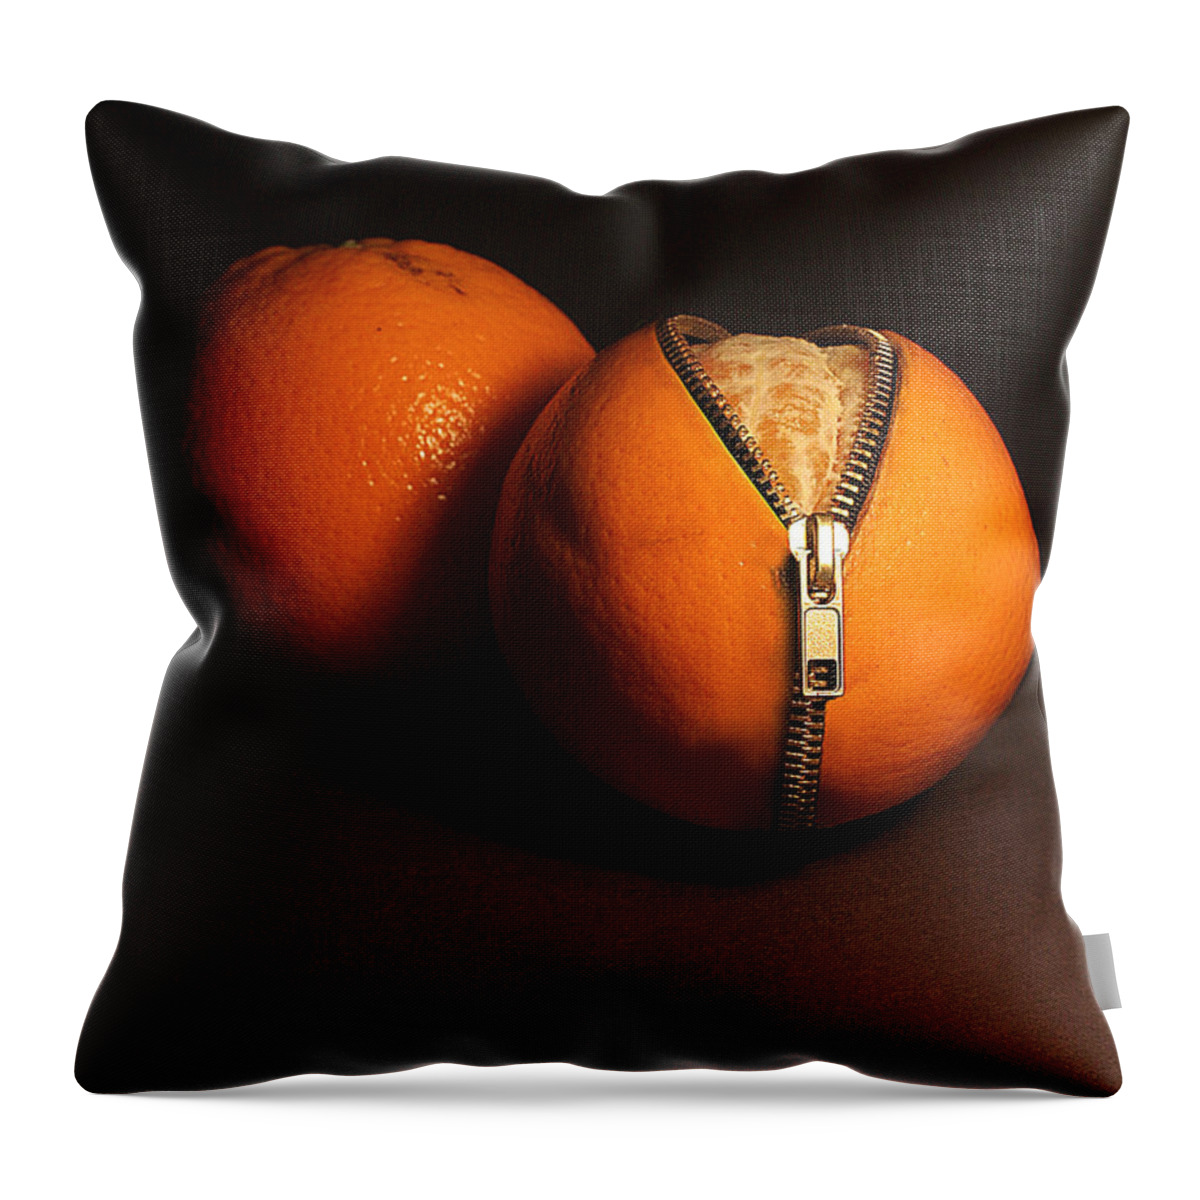 Idea Throw Pillow featuring the photograph Zipped Oranges by Jaroslaw Blaminsky